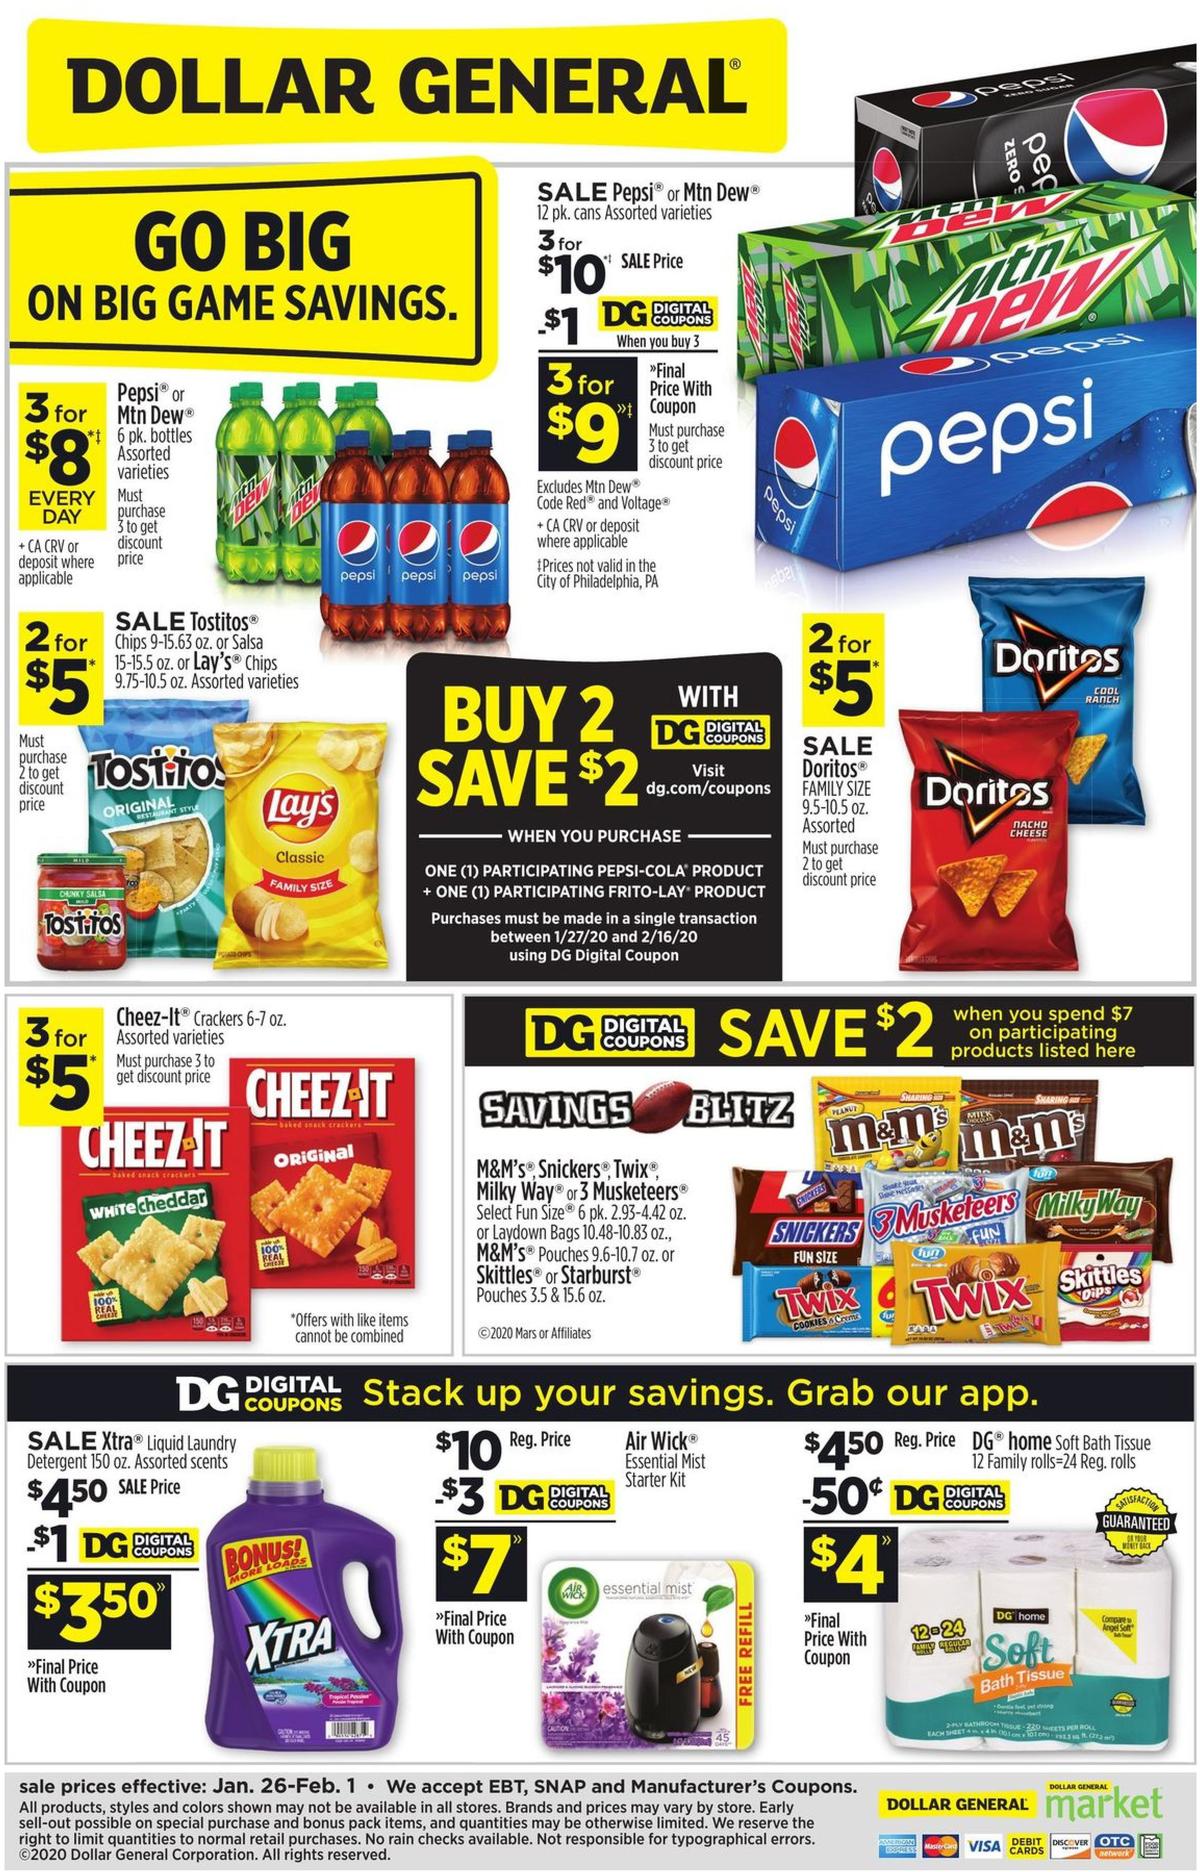 Dollar General Game Day Essentials Priced Right Weekly Ad from January 26